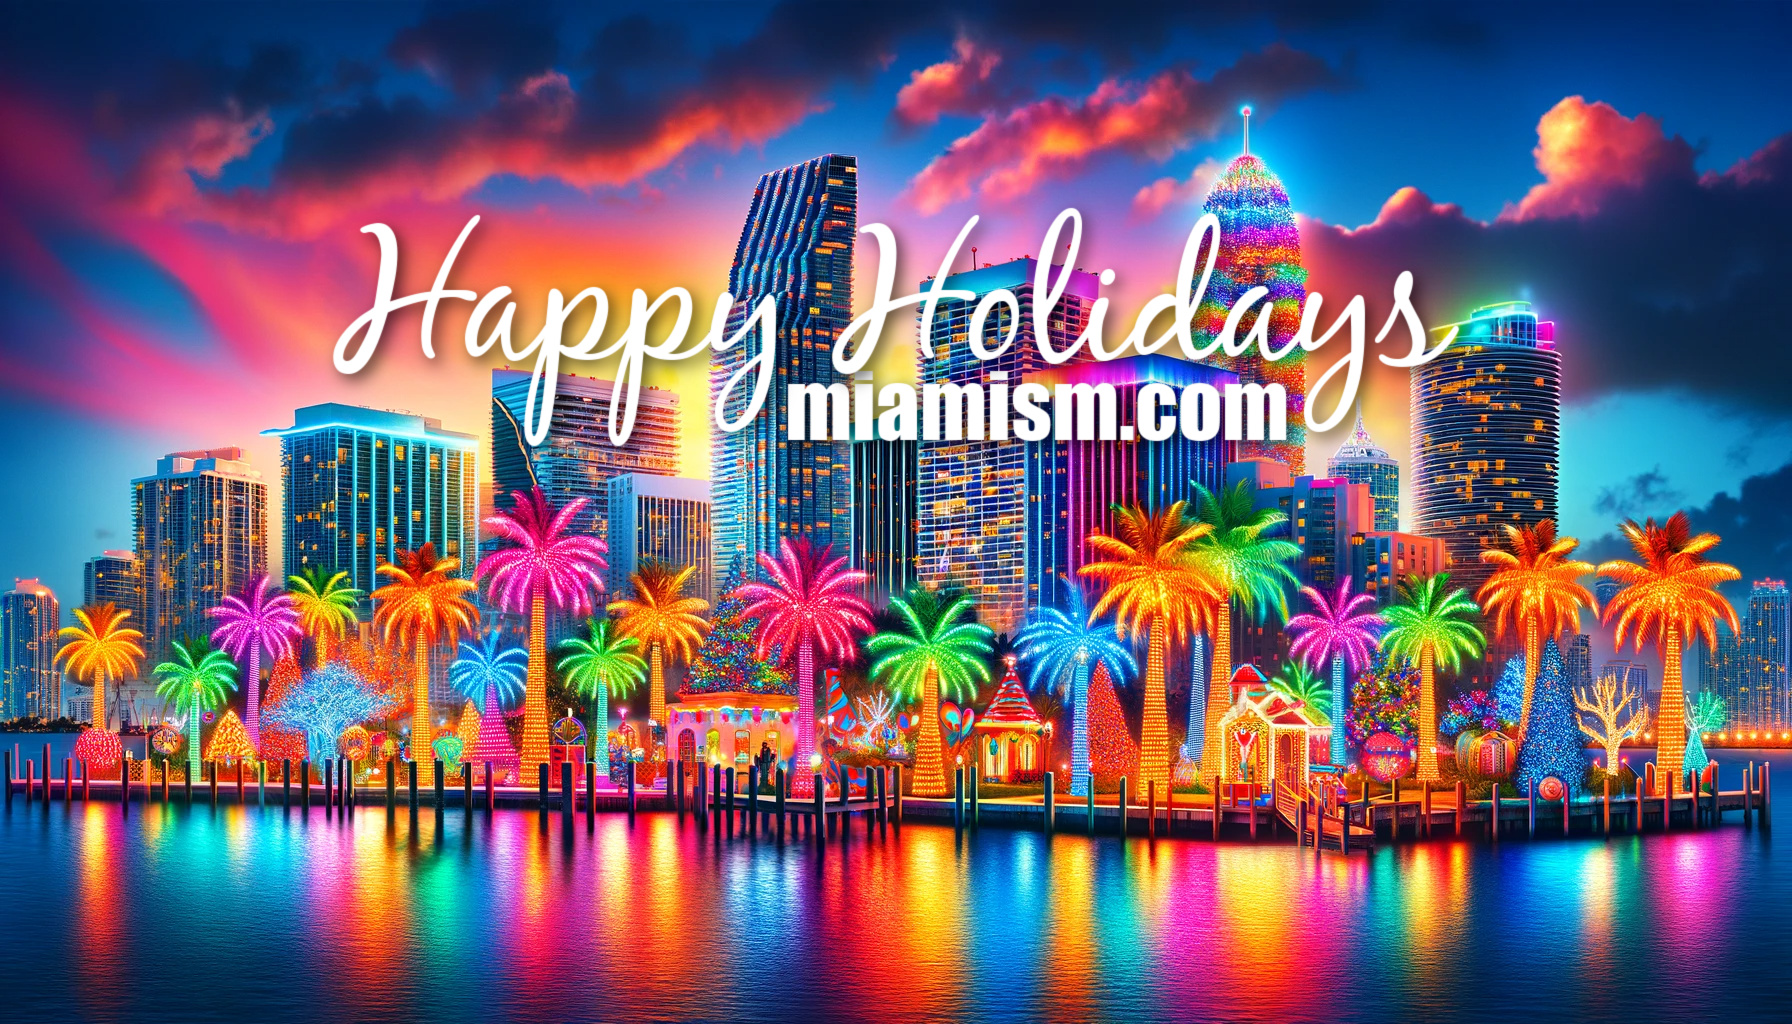 DALL·E 2023 12 23 12.05.38 A vibrant and joyful holiday image for a Miami real estate and lifestyle blog, emphasizing Miami's lively atmosphere. The image depicts Miami's skylin